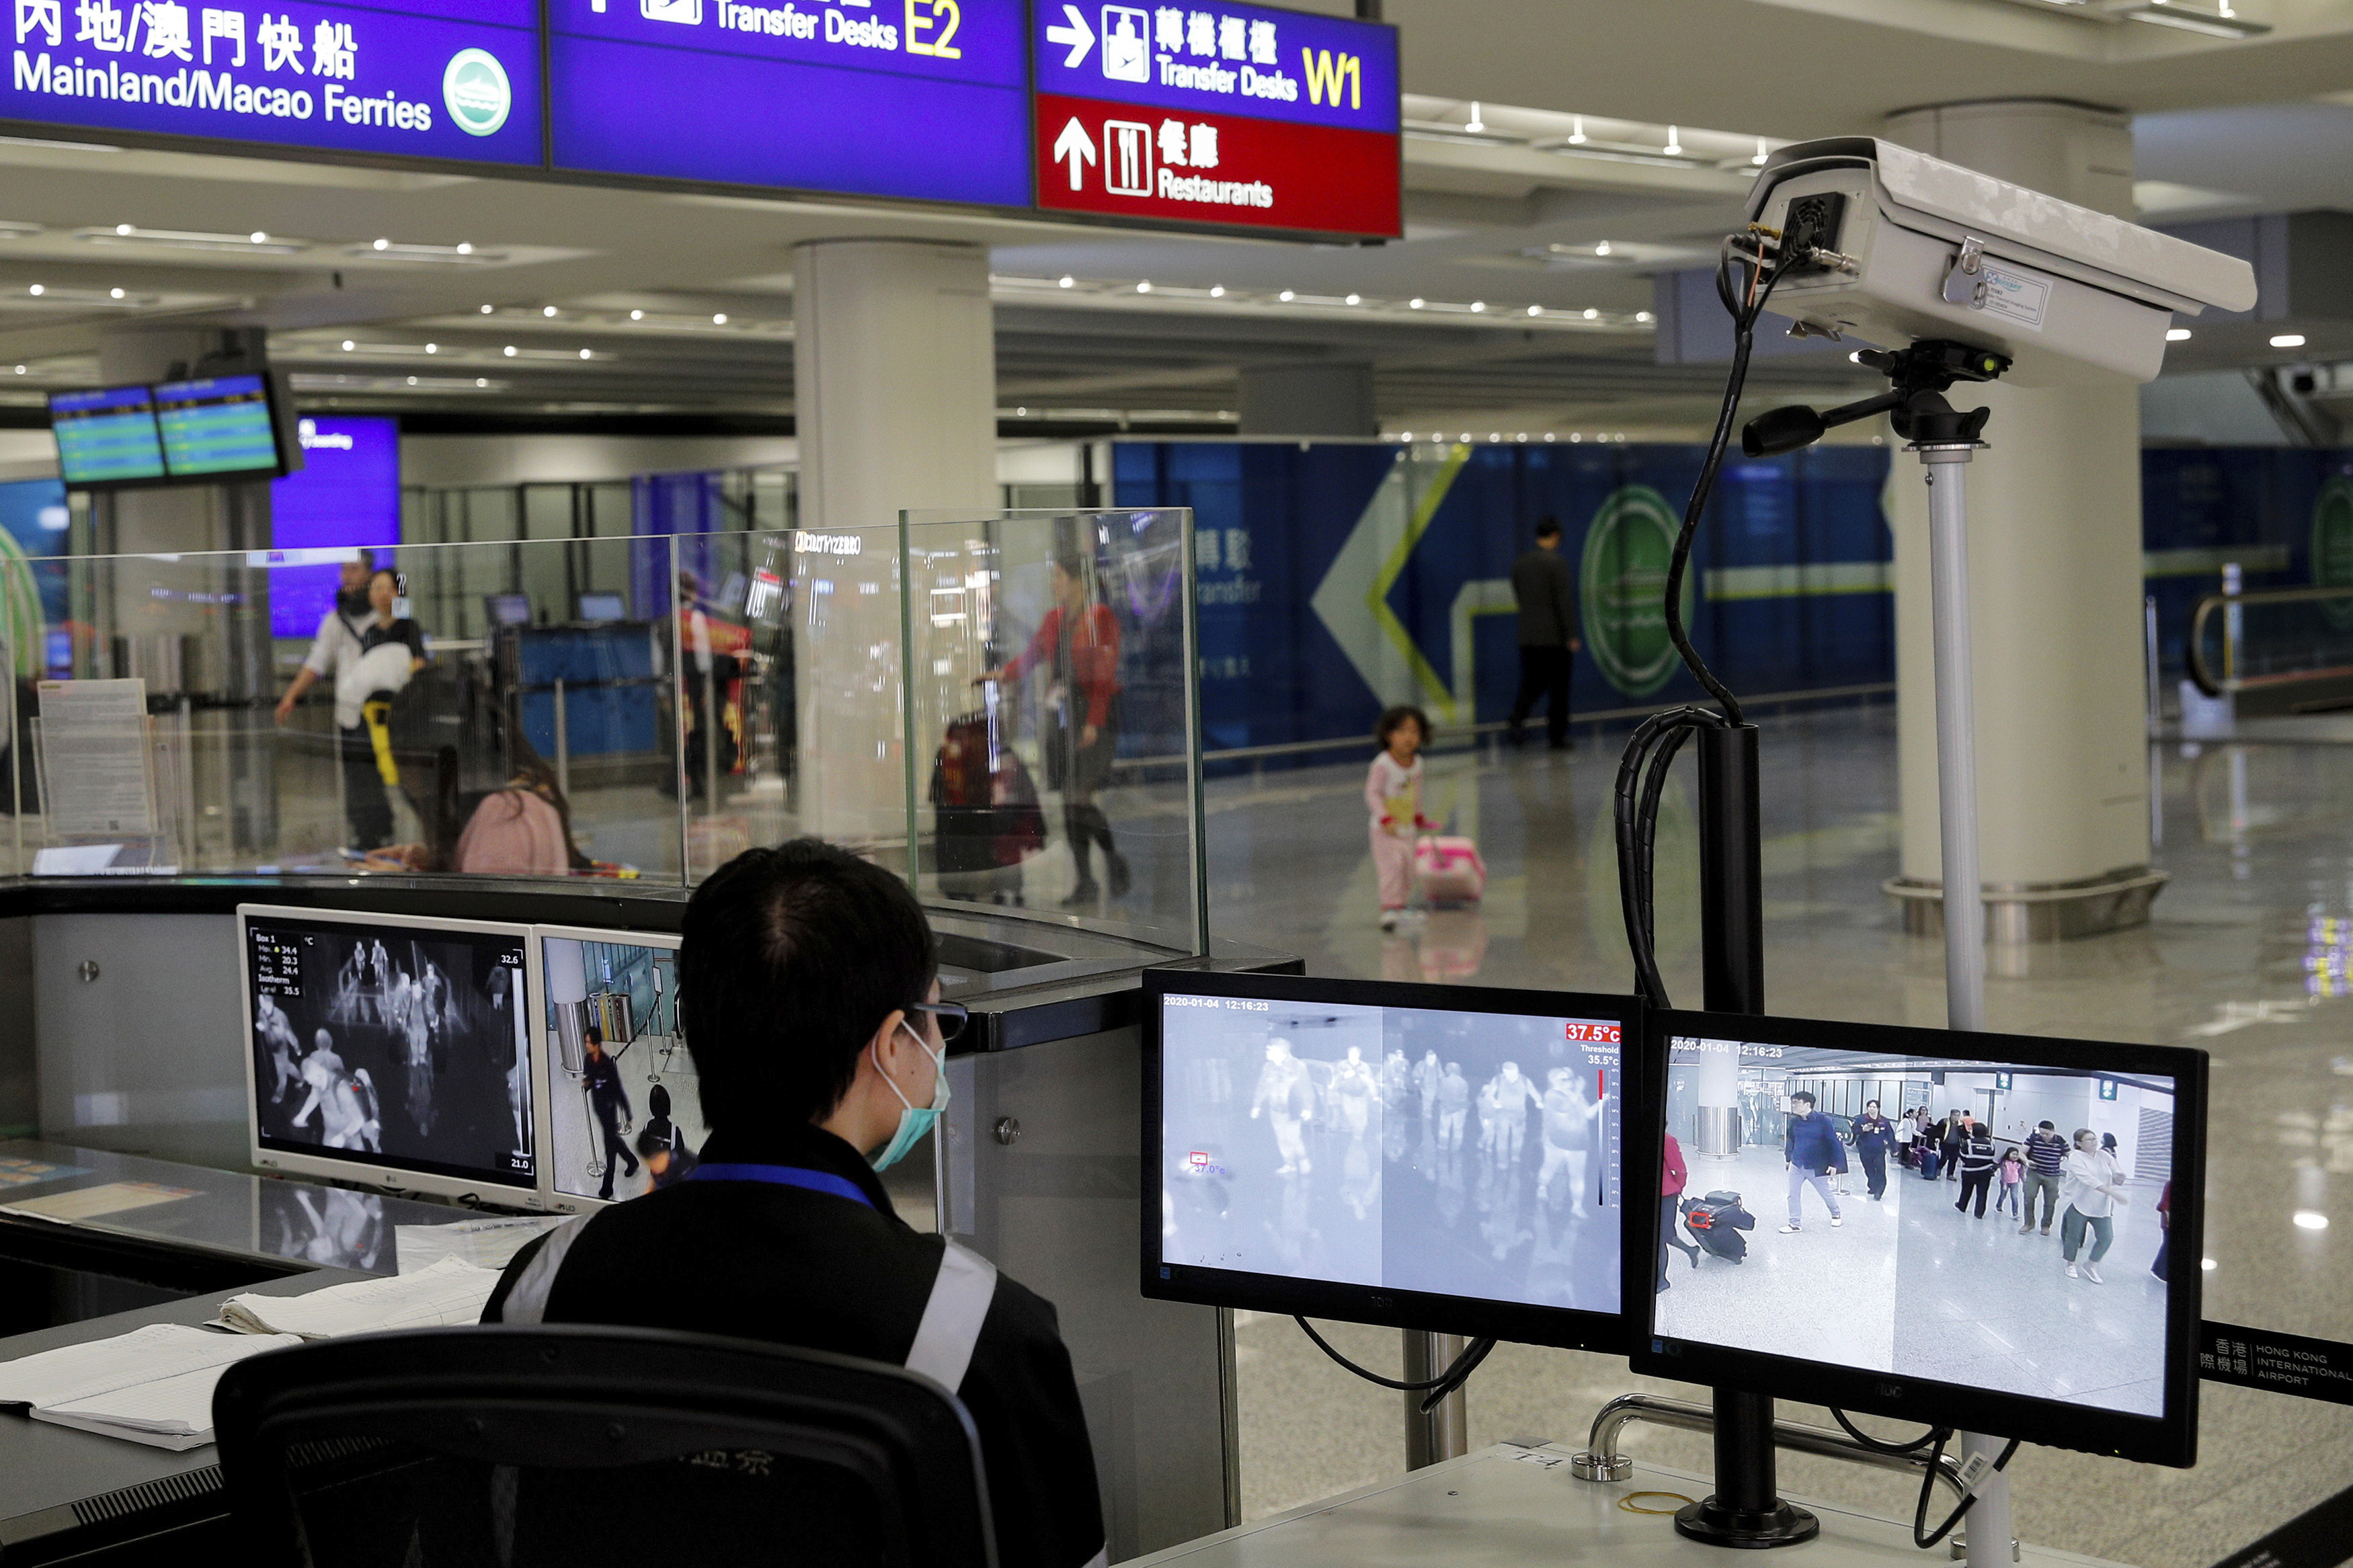 Travelers from China are being screened at US airports for a mysterious new virus that’s killed 2 and sickened dozens